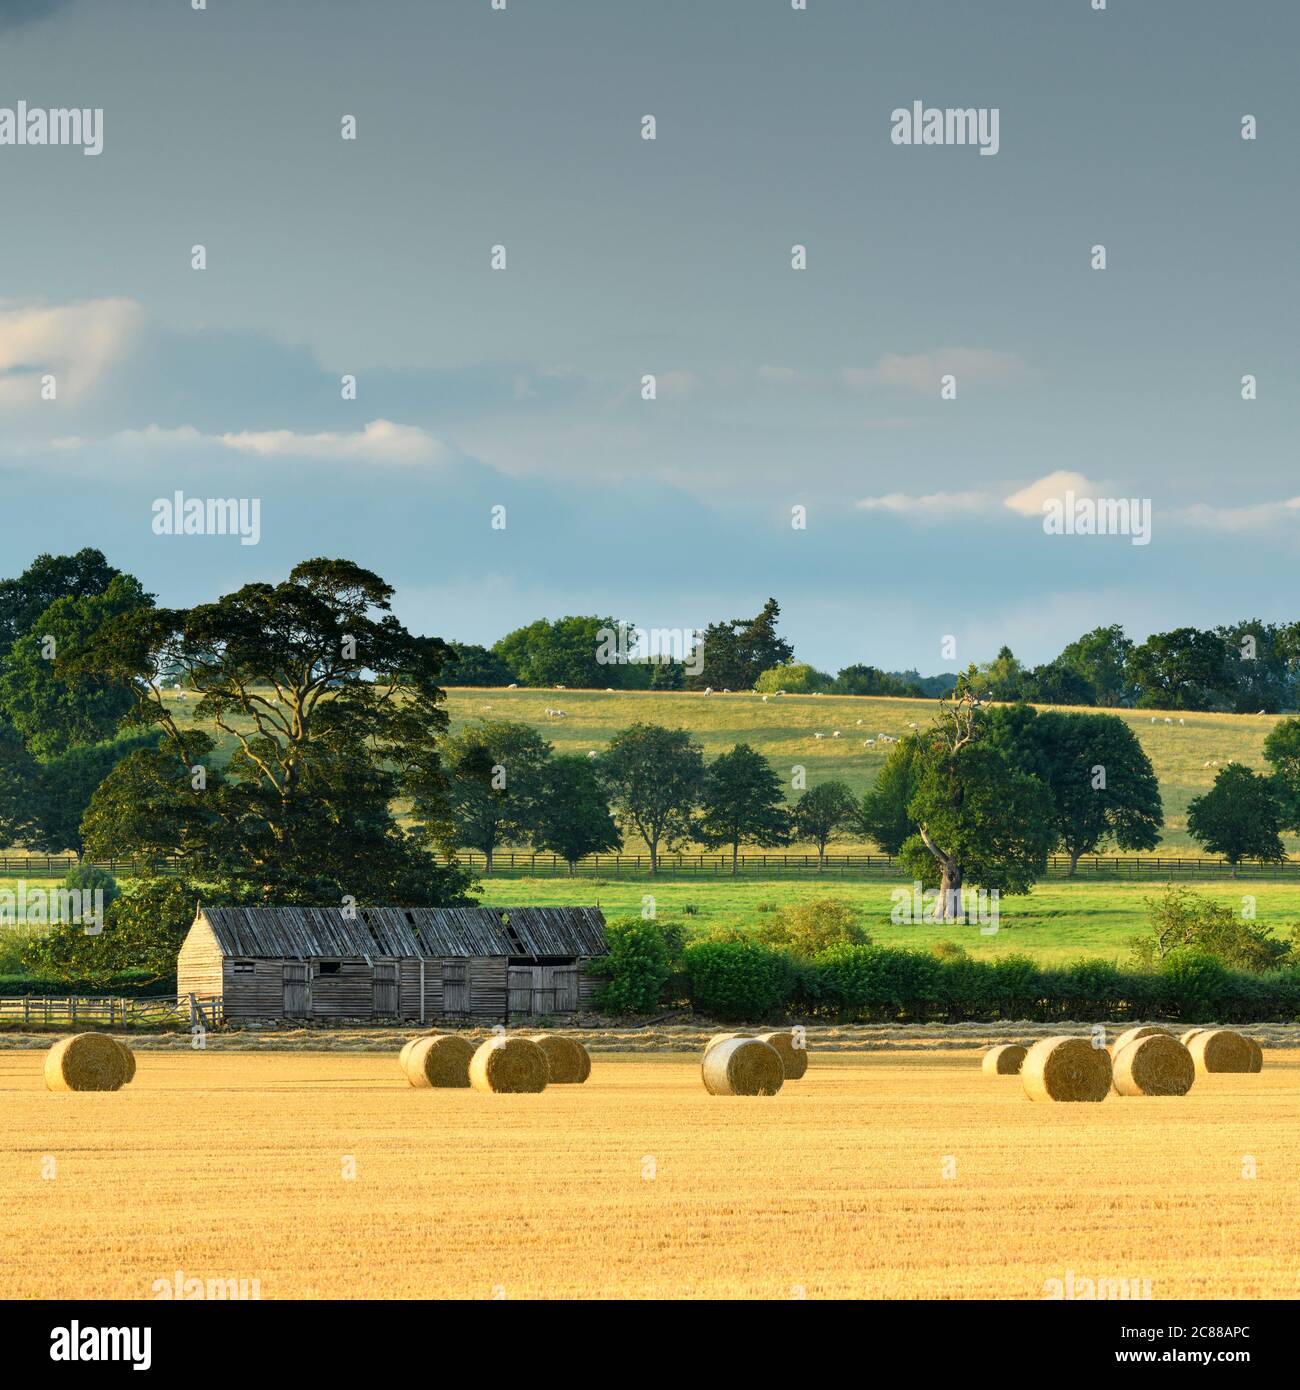 Scenic rural landscape (straw bales in farm field after wheat harvest, rustic wooden barn & sunlight on green fields) - North Yorkshire, England UK. Stock Photo